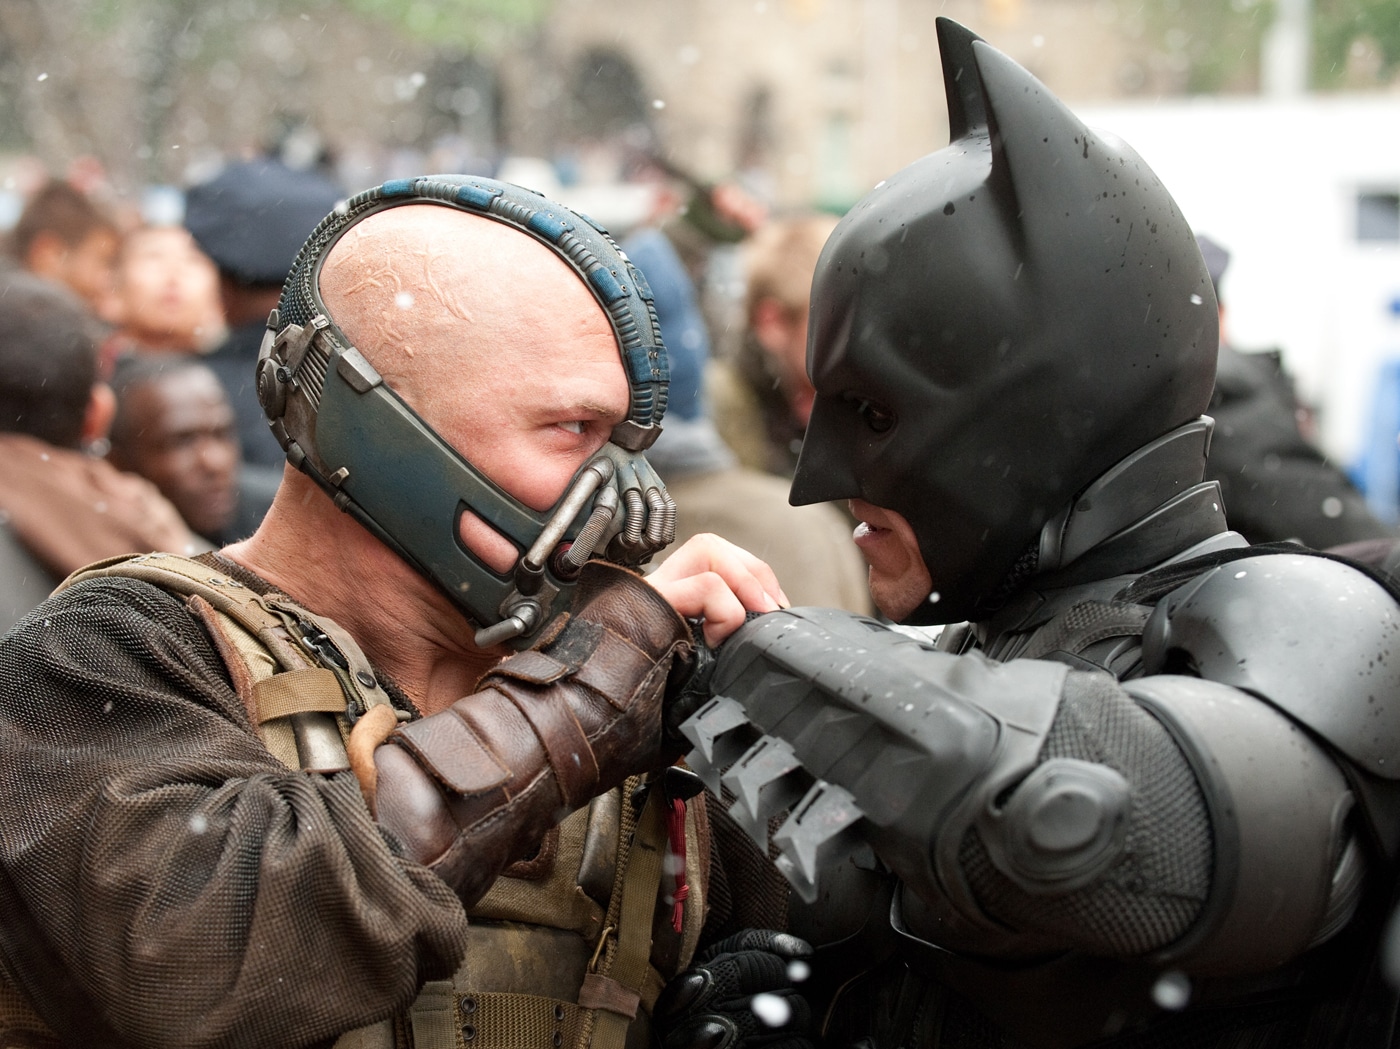 Comic Books vs. Films: Should Fans React To The Inaccuracy?